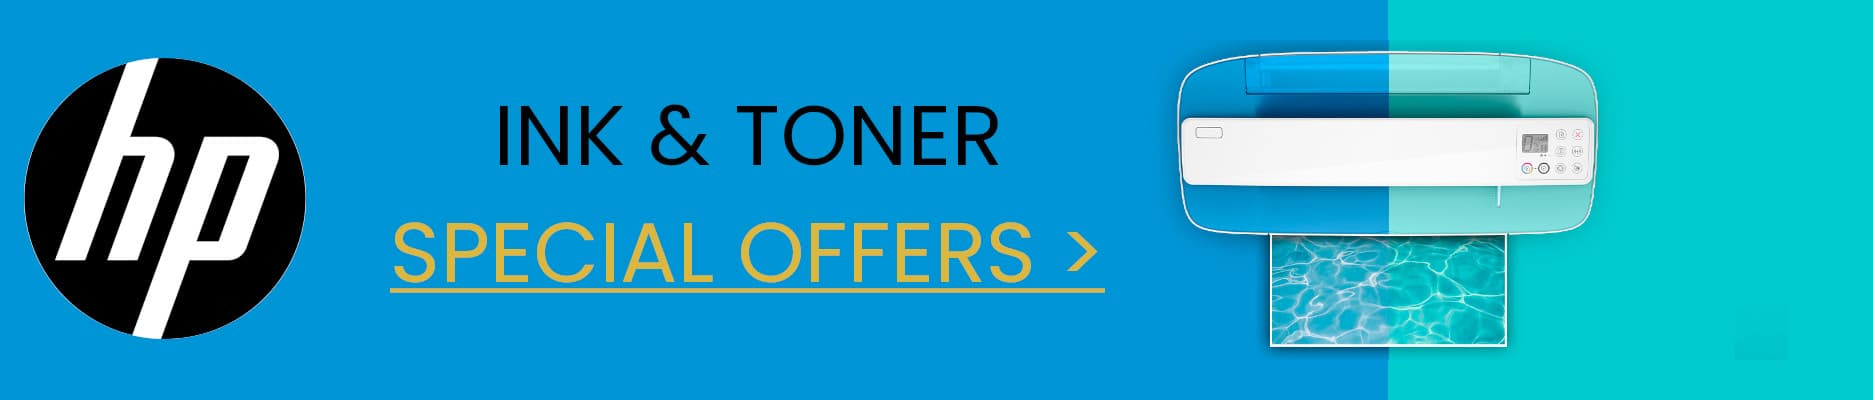 HP Ink and toner special offers